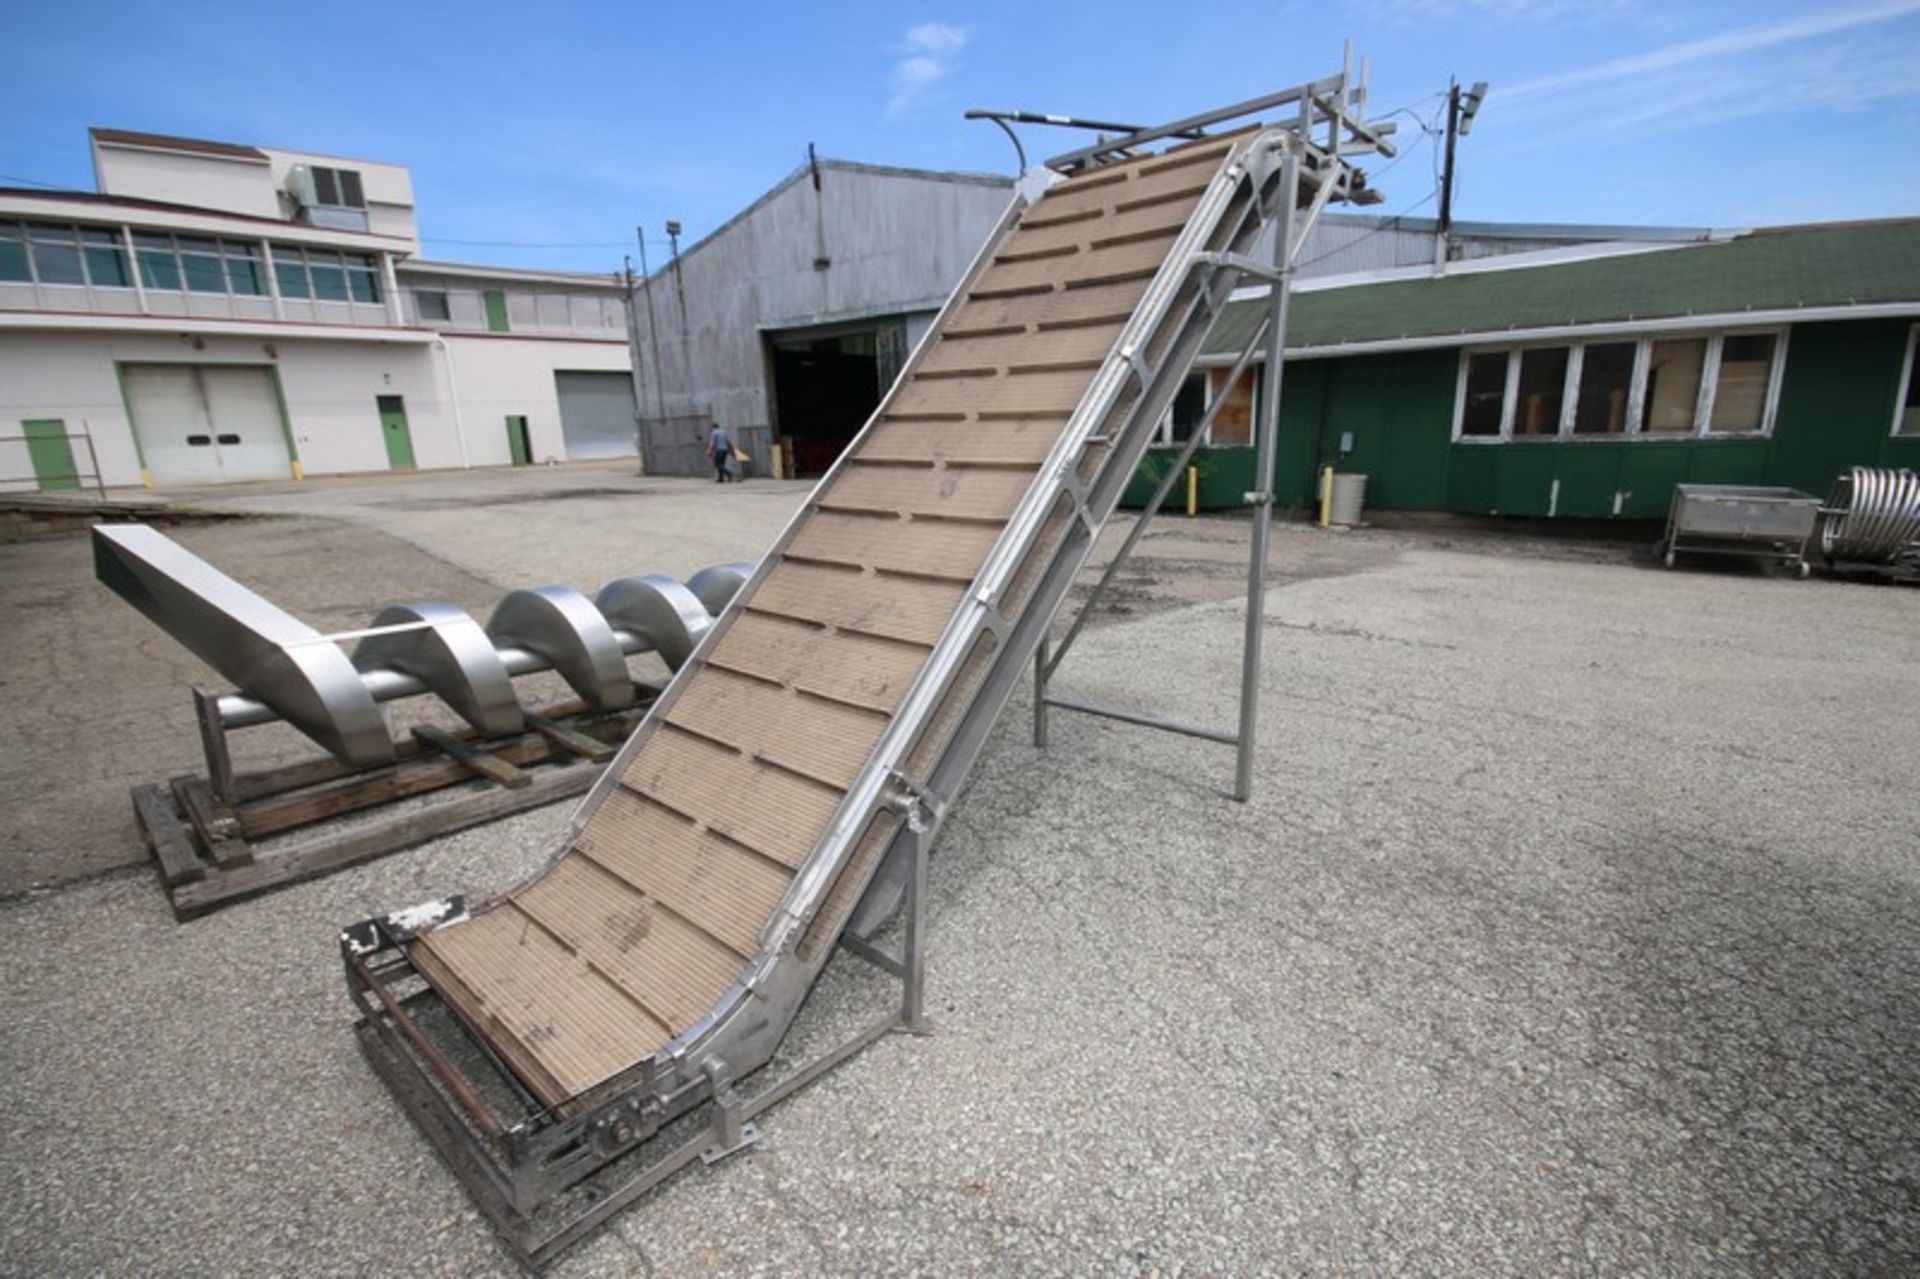 Aporx. 13' L x 36" W x 104" H S/S Inclined Conveyor with Intralox Type Belt with 8.5" Divider